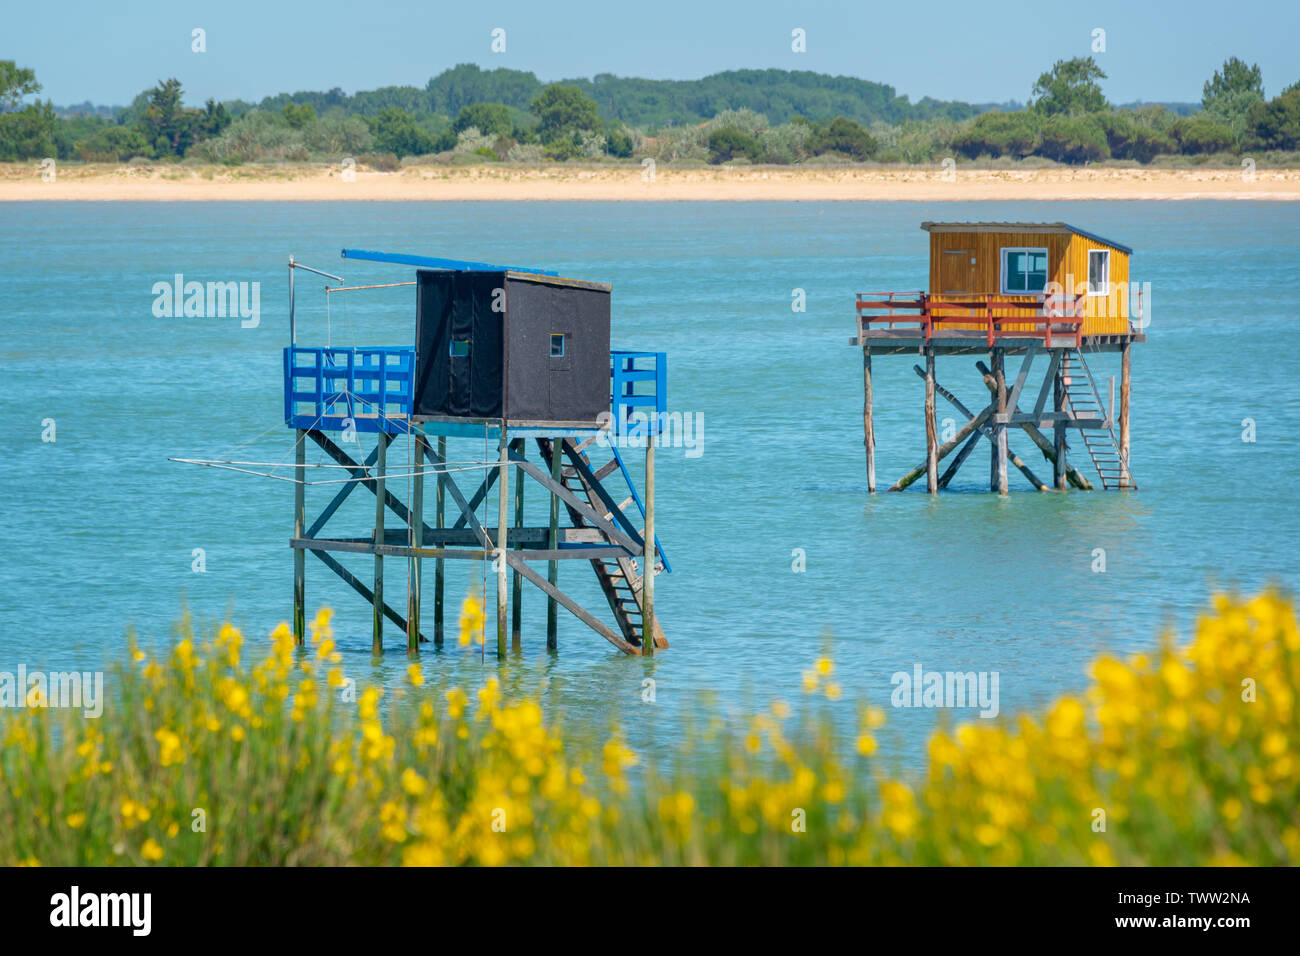 Typical and colorful wooden fishing huts on stilts in the atlantic ocean near La Rochelle, France Stock Photo